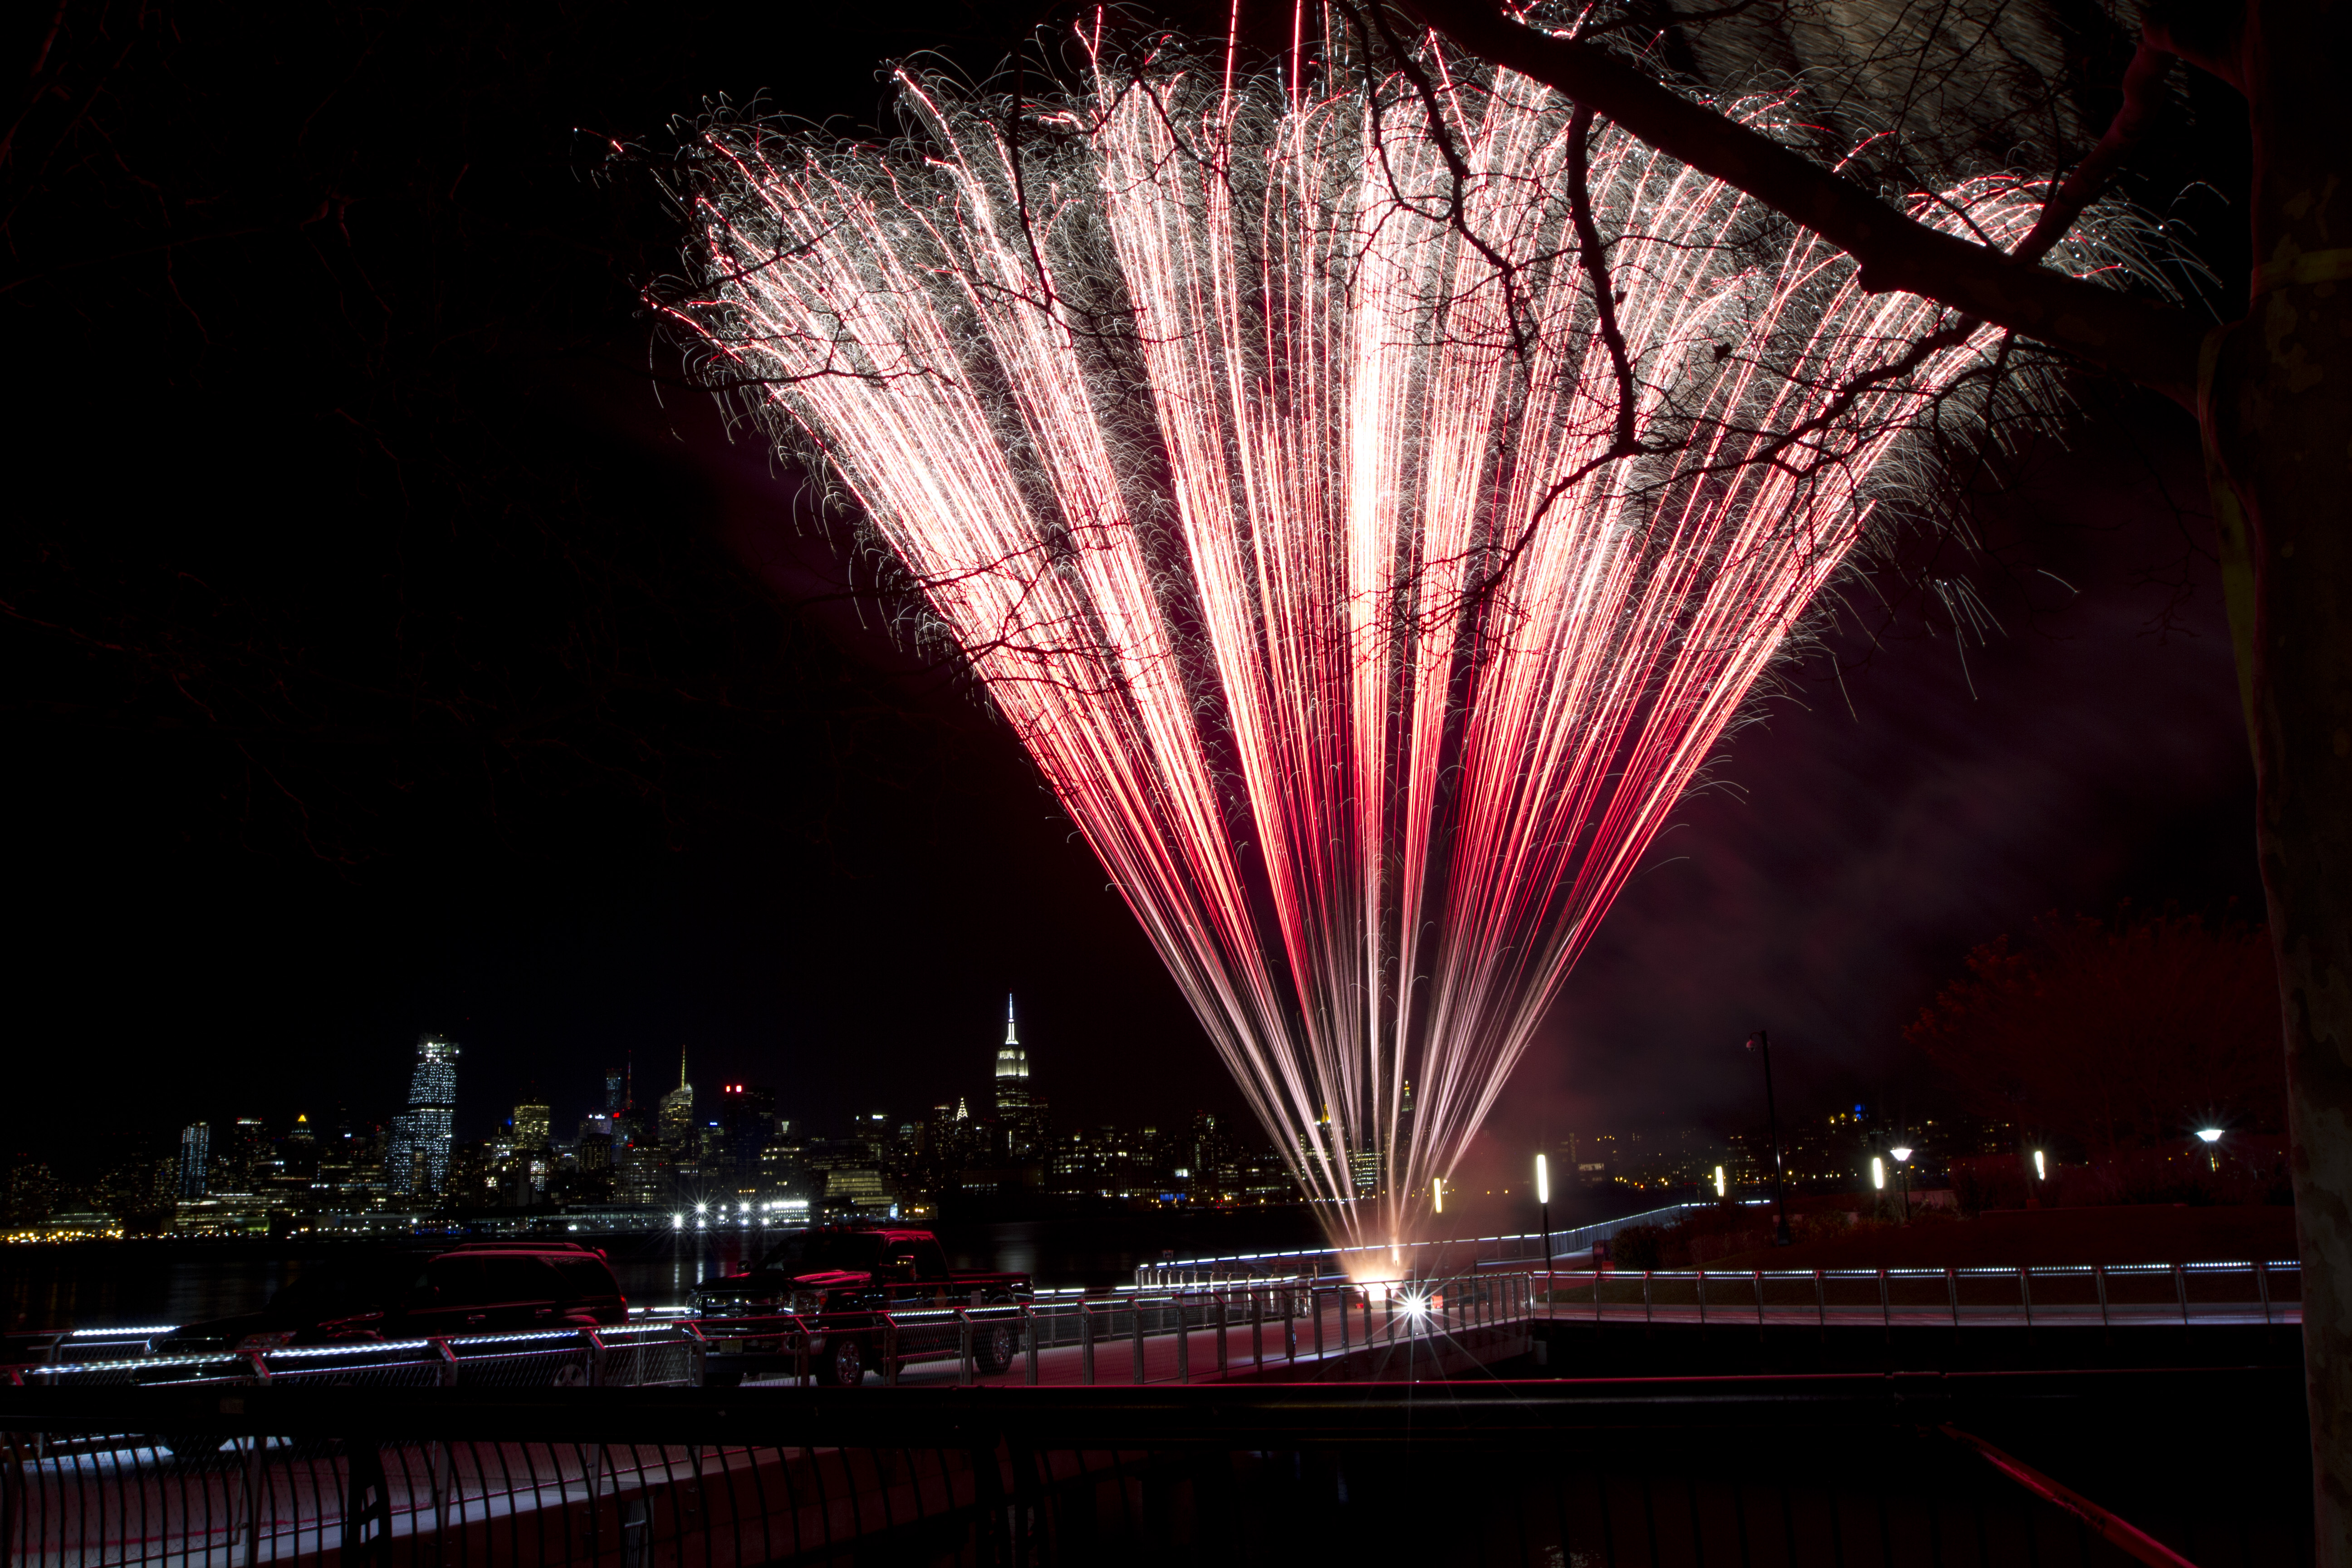 A bright red fan cake is ignited near New York City during a NJ wedding fireworks show.